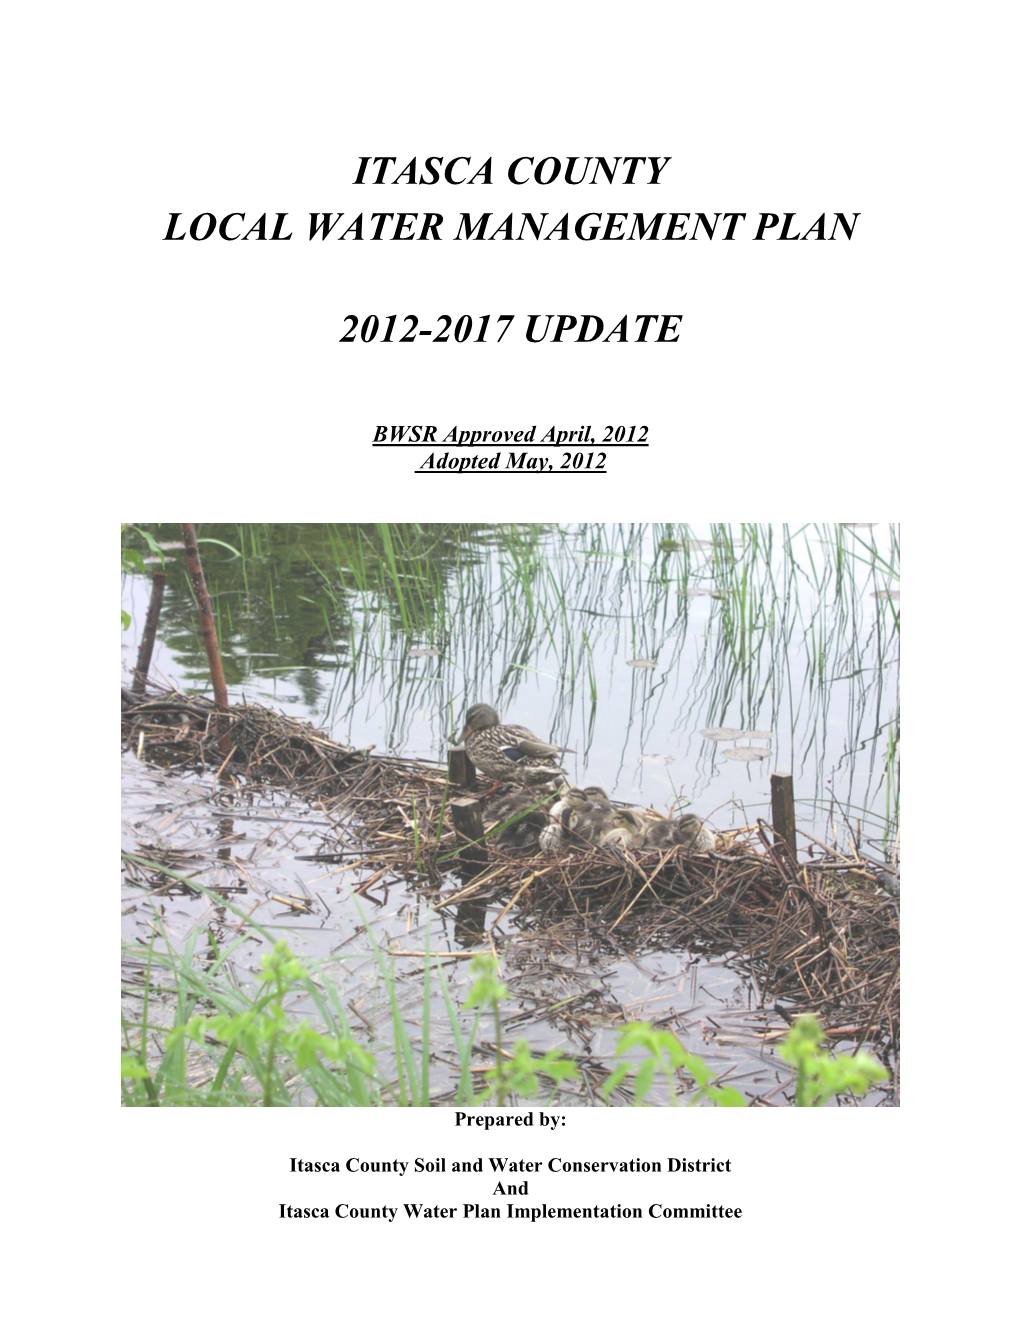 Itasca County Local Water Management Plan 2012-2017 Update